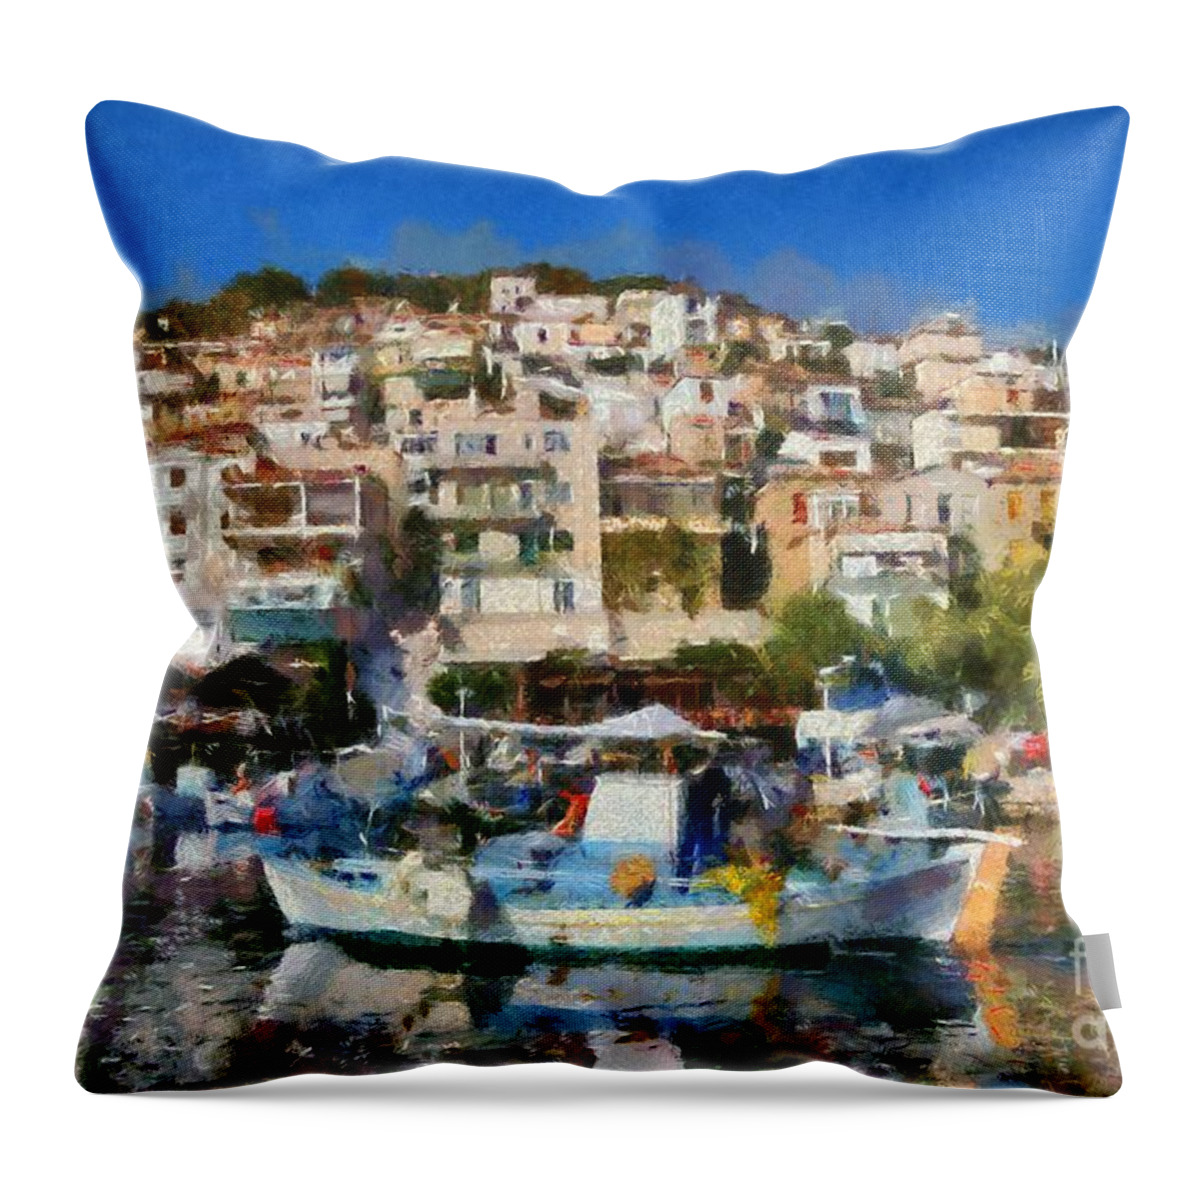 Lesvos; Lesbos; Plomari; City; Town; Port; Harbor; House; Houses; Color; Colorful; Colour; Colourful; Islands; Sea; Greece; Greek; Island; Hellas; Aegean; Summer; Holidays; Vacation; Tourism; Touristic; Travel; Trip; Voyage; Journey; Paint; Painting; Paintings; Boat; Boats; Fishing Throw Pillow featuring the painting Plomari town by George Atsametakis